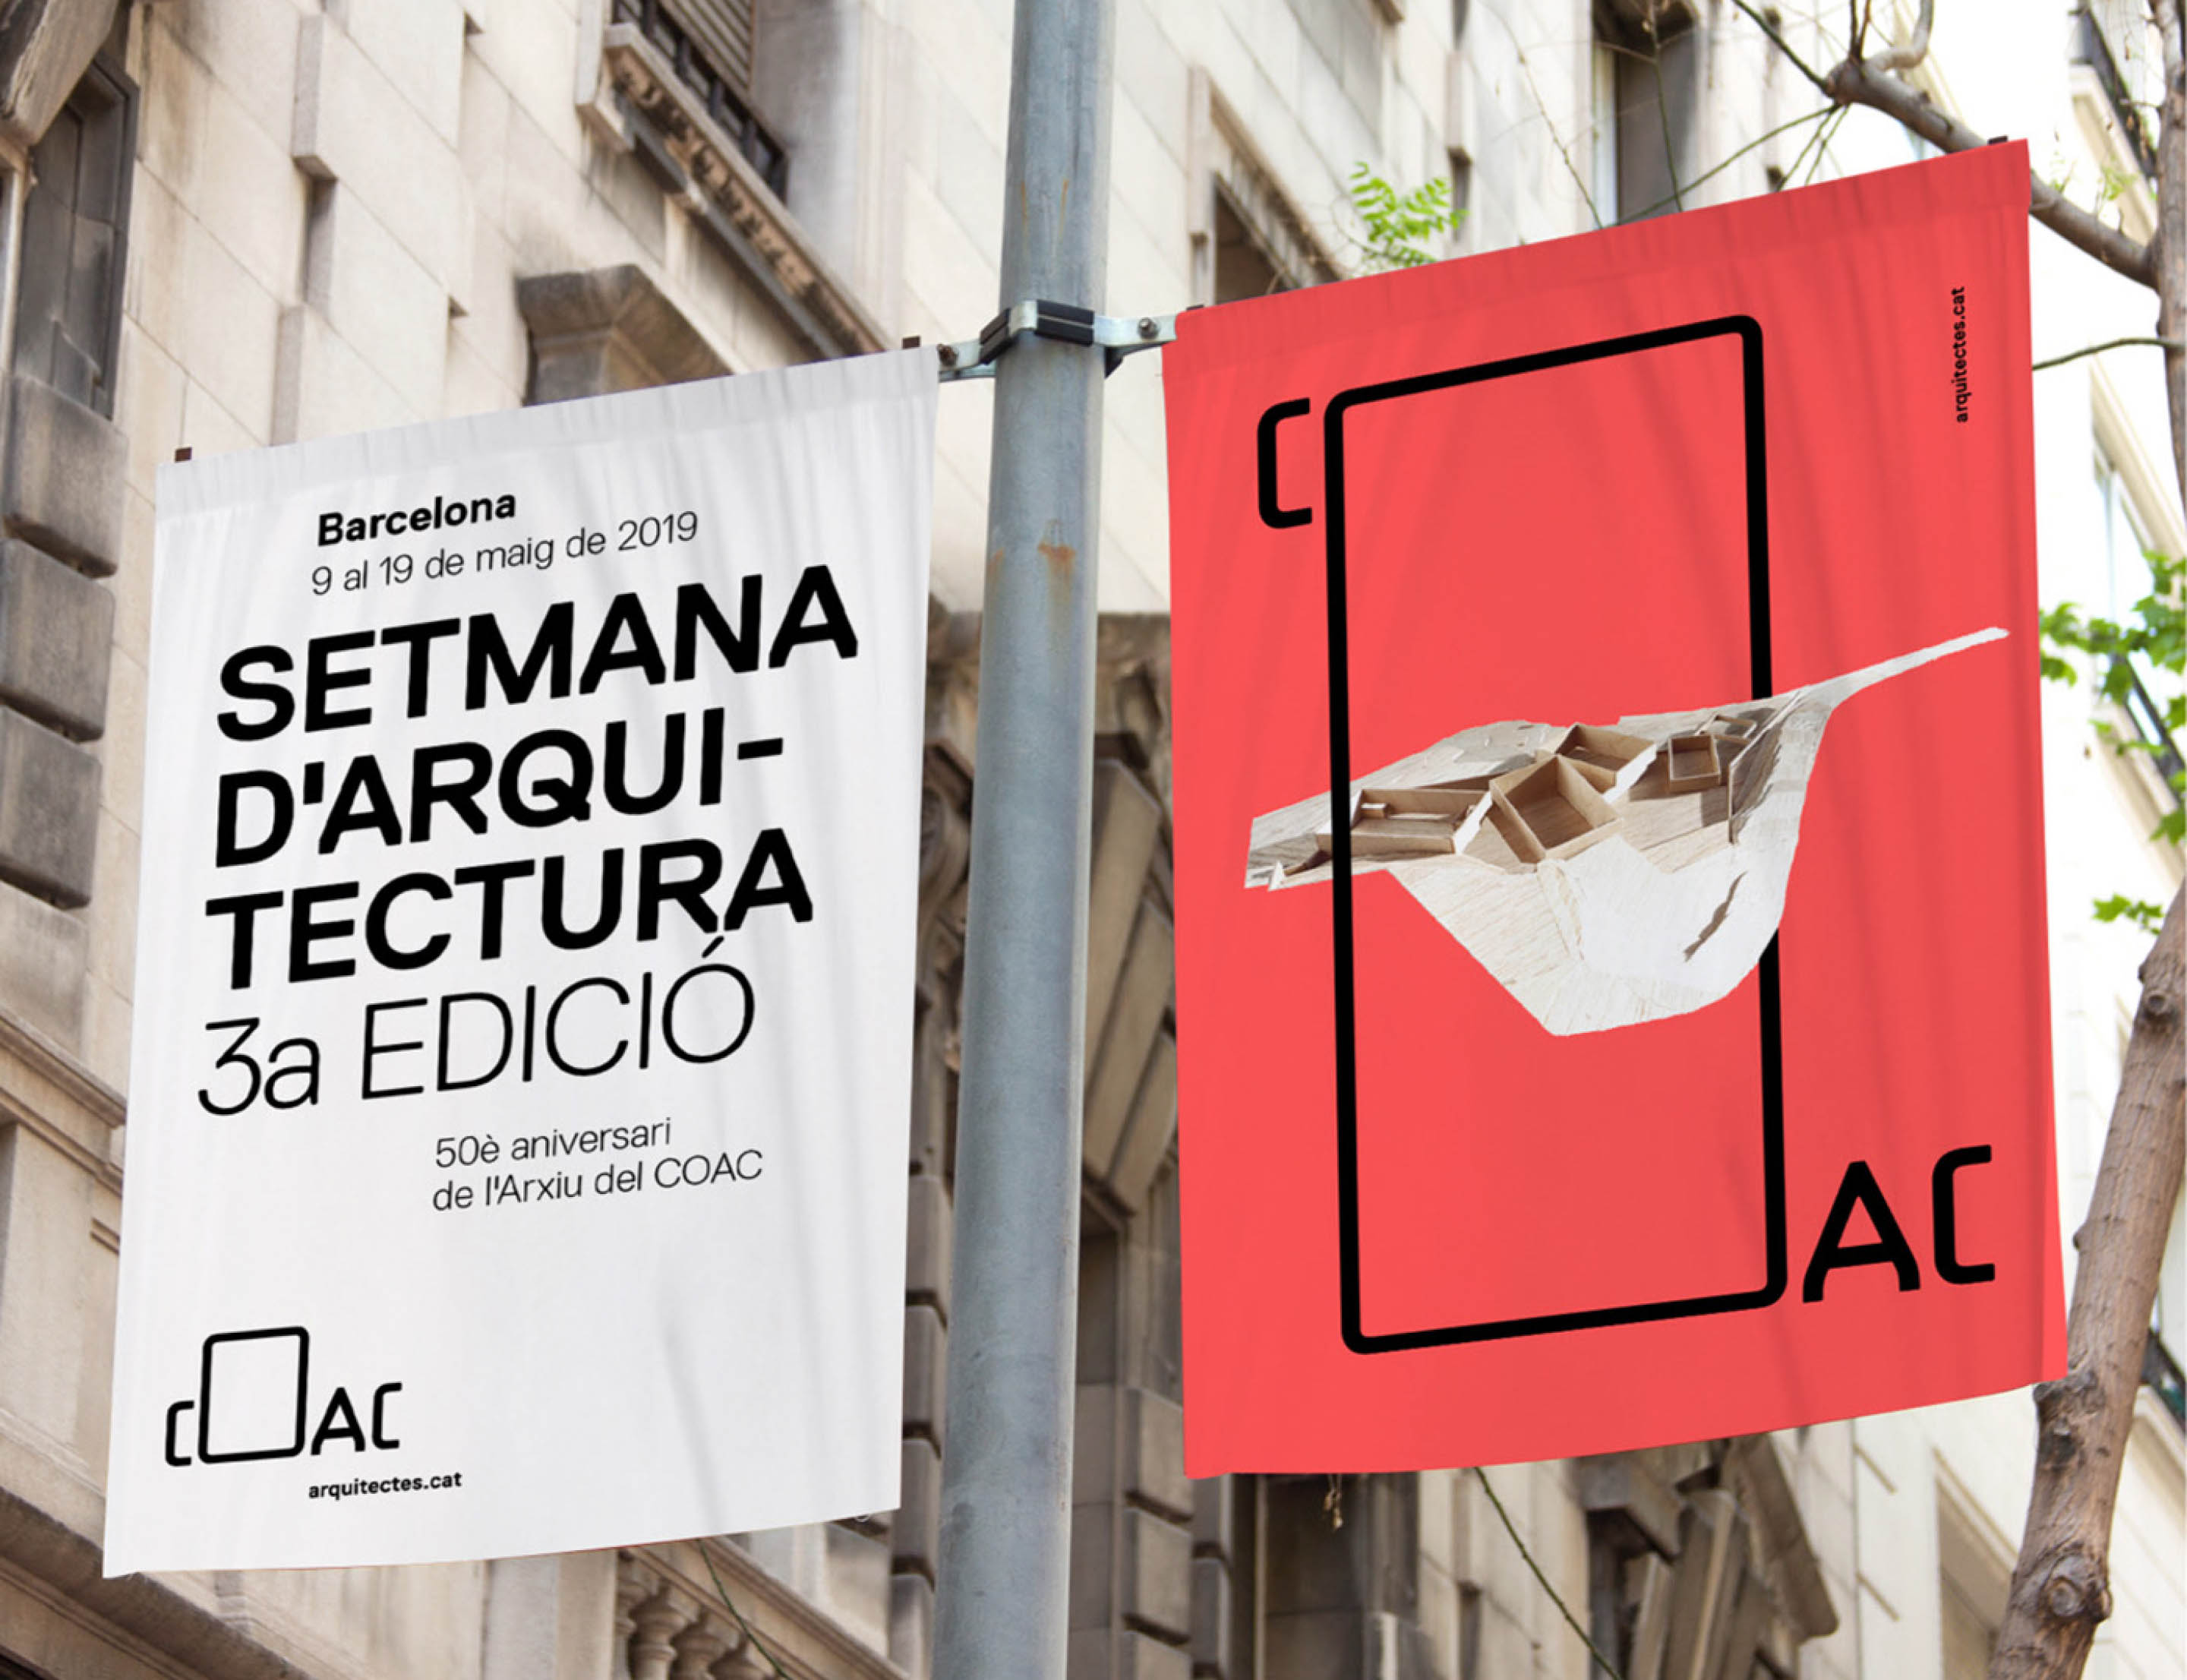 Col·legi d’Arquitectes de Catalunya is the institution that has been representing architecture professionals in Catalonia for more than 80 years. Today it has established itself in our society as a source of national and international prestige.
